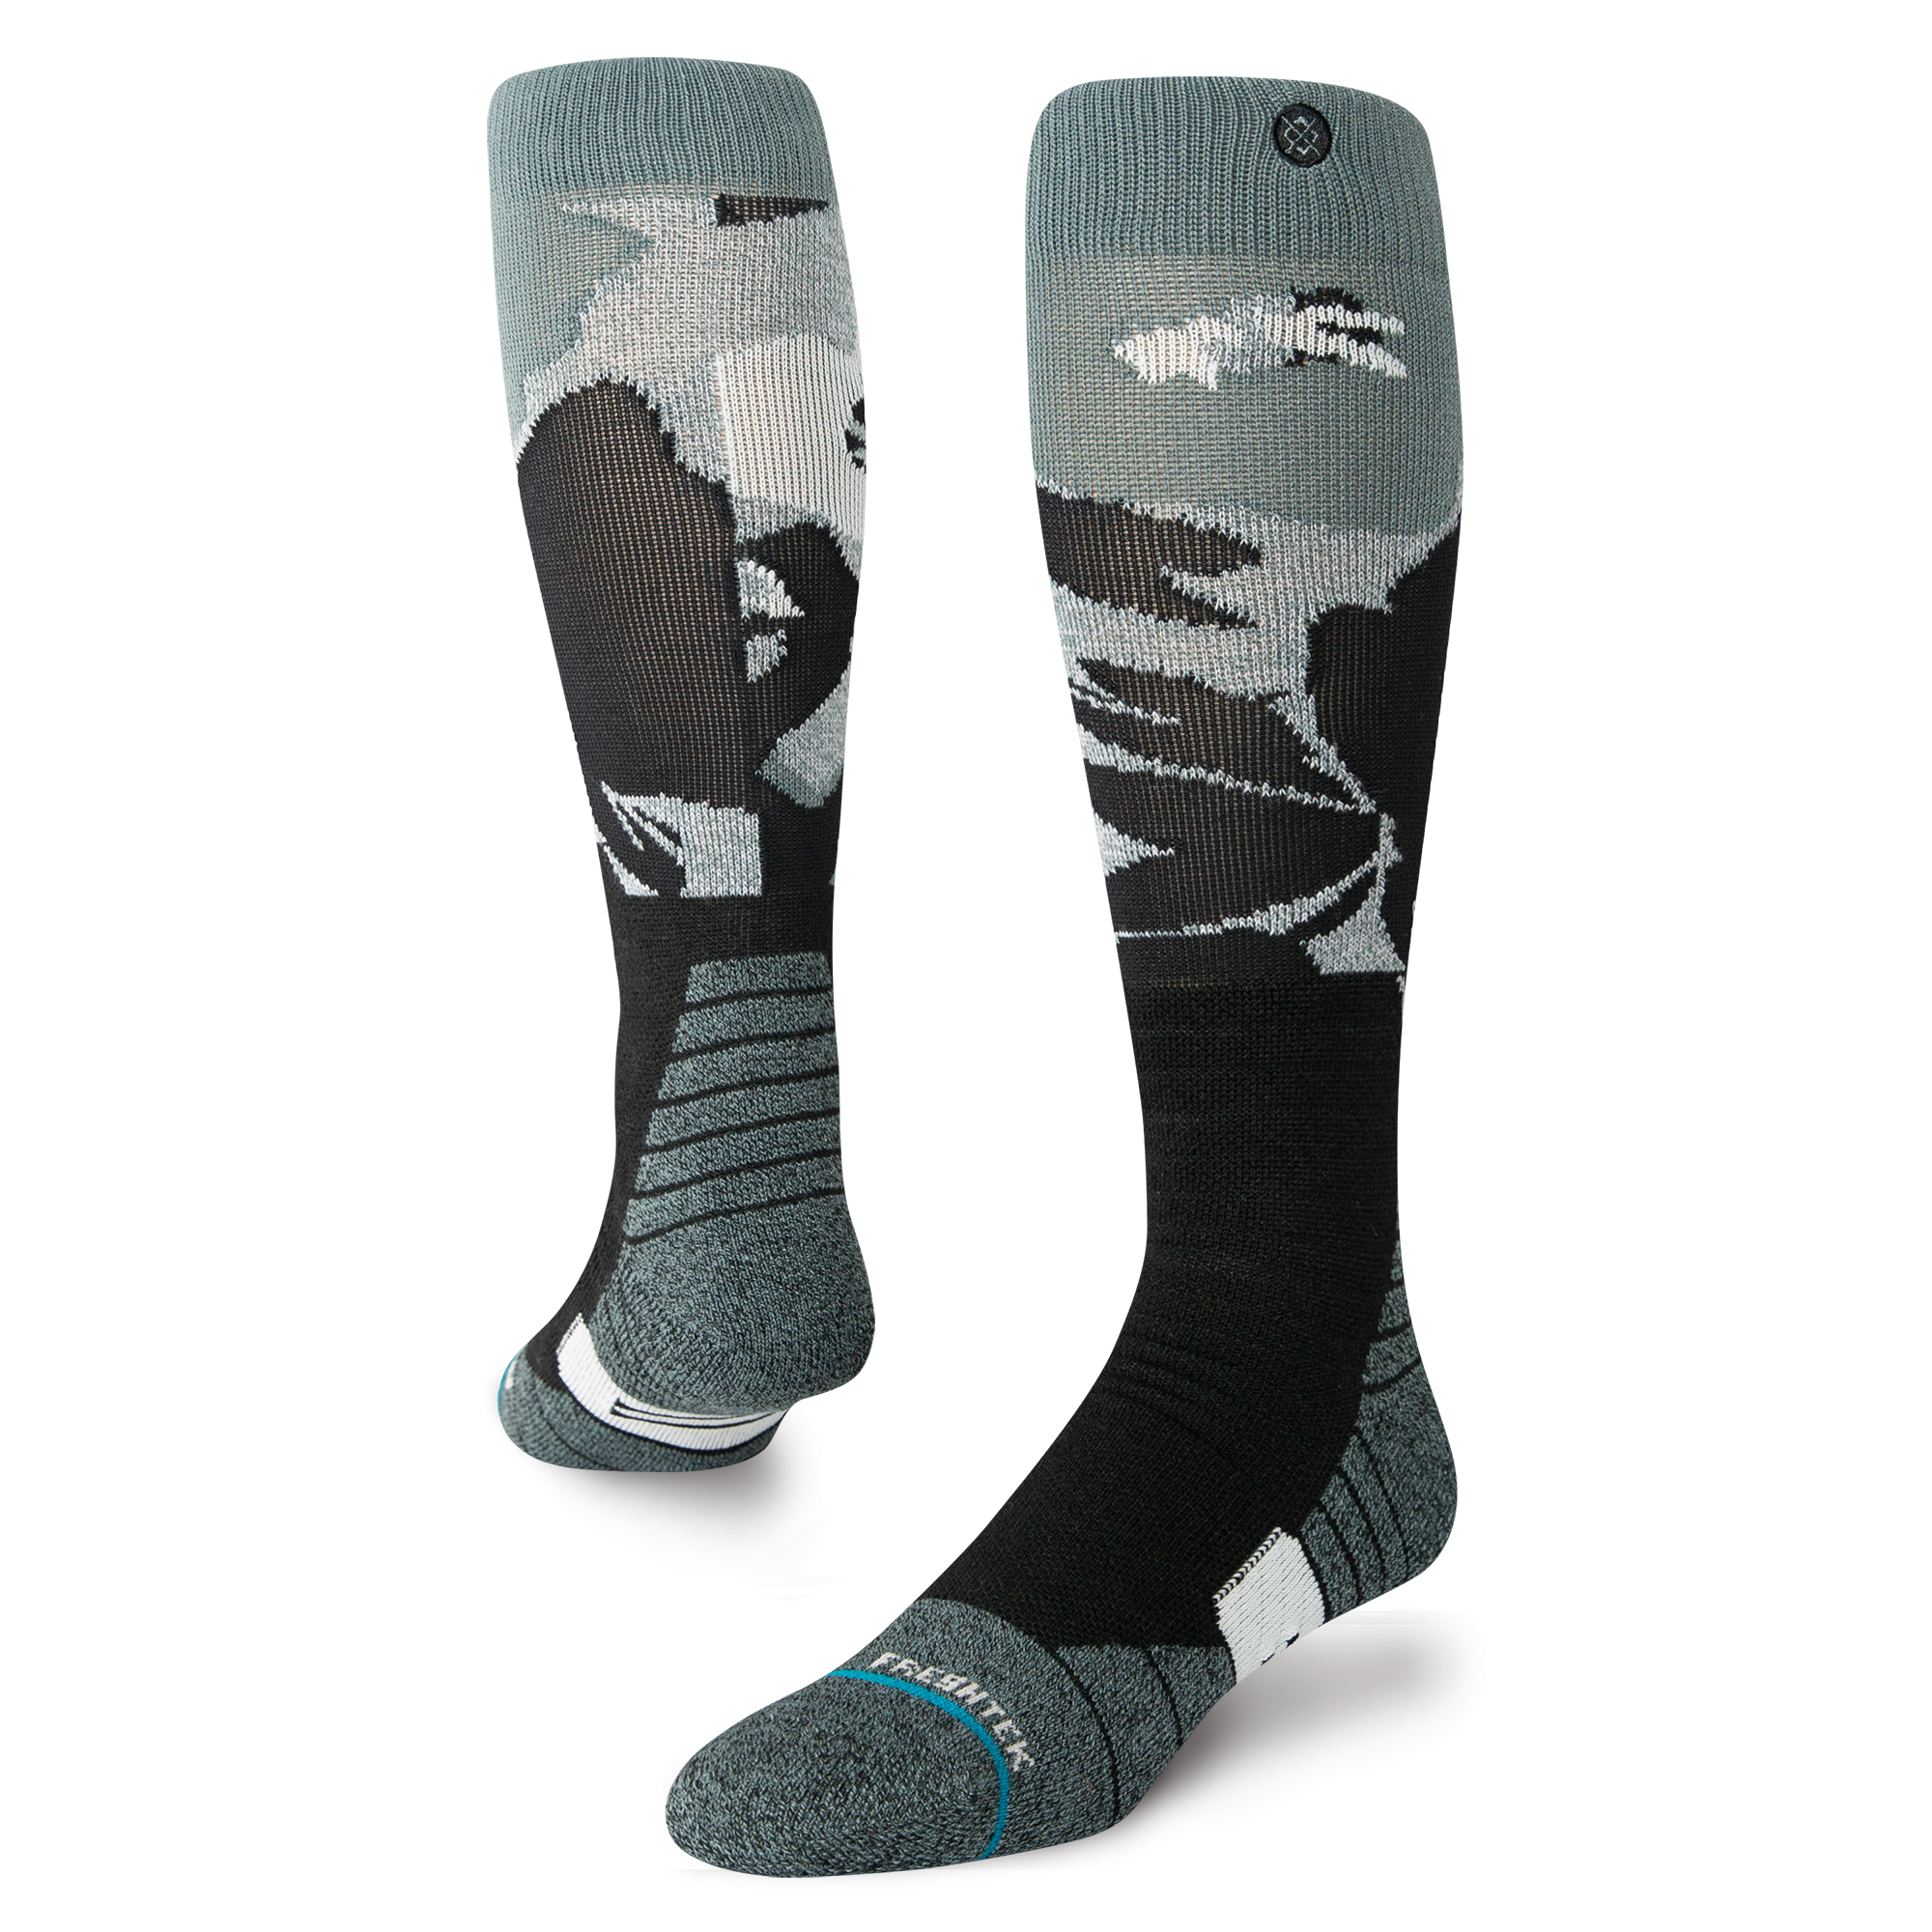 The NBA And MLB Use Them, Are Stance Ski Socks The Best On The Market? -  Unofficial Networks